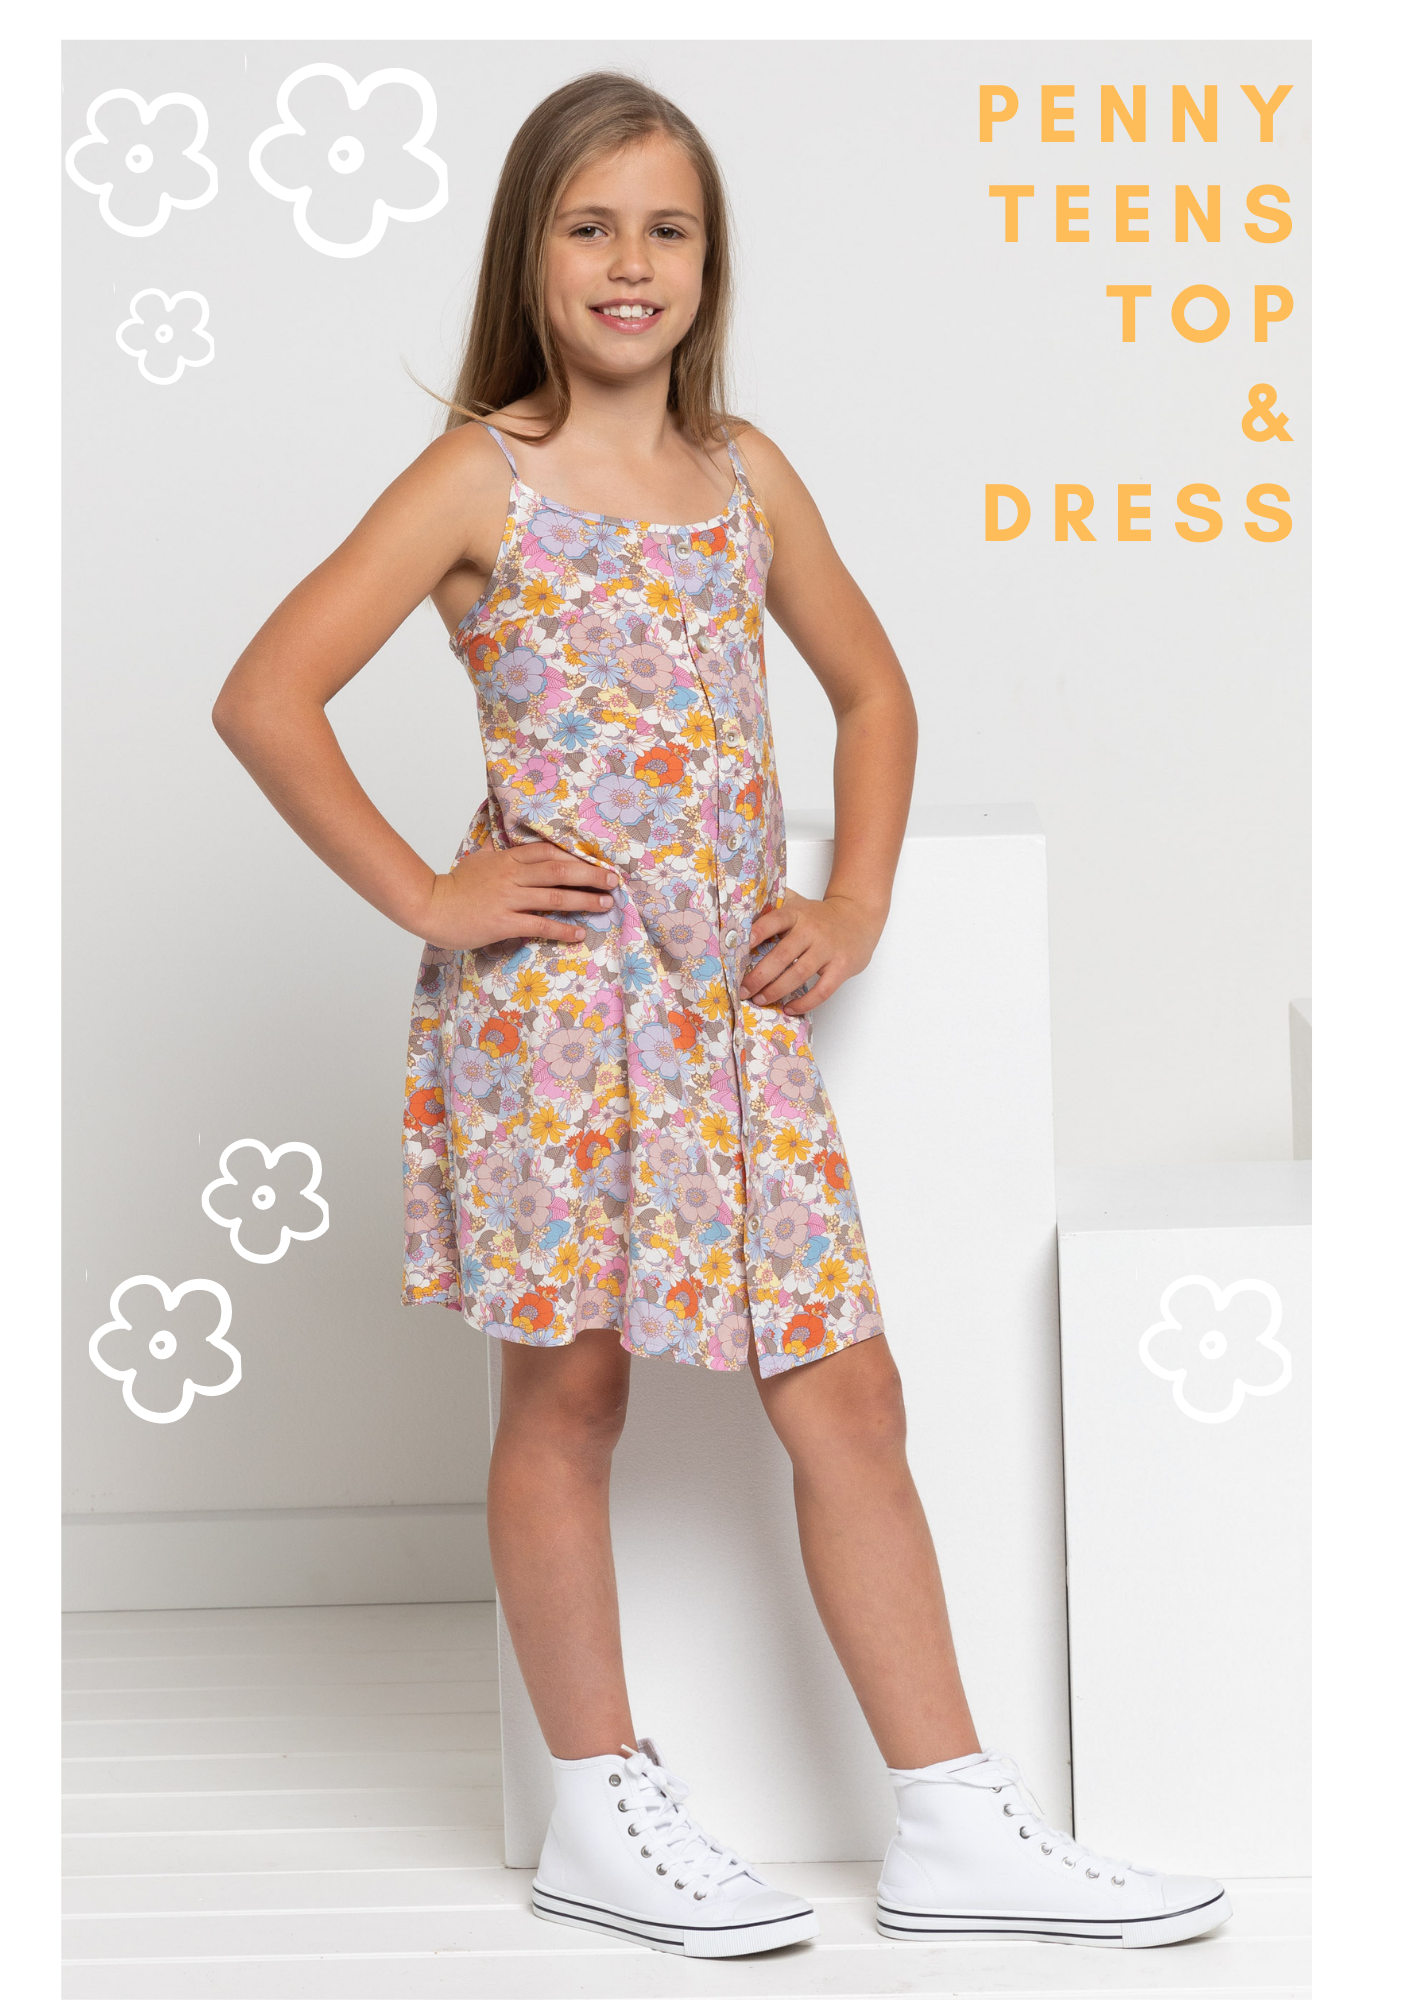 Penny Teens Dress and Top